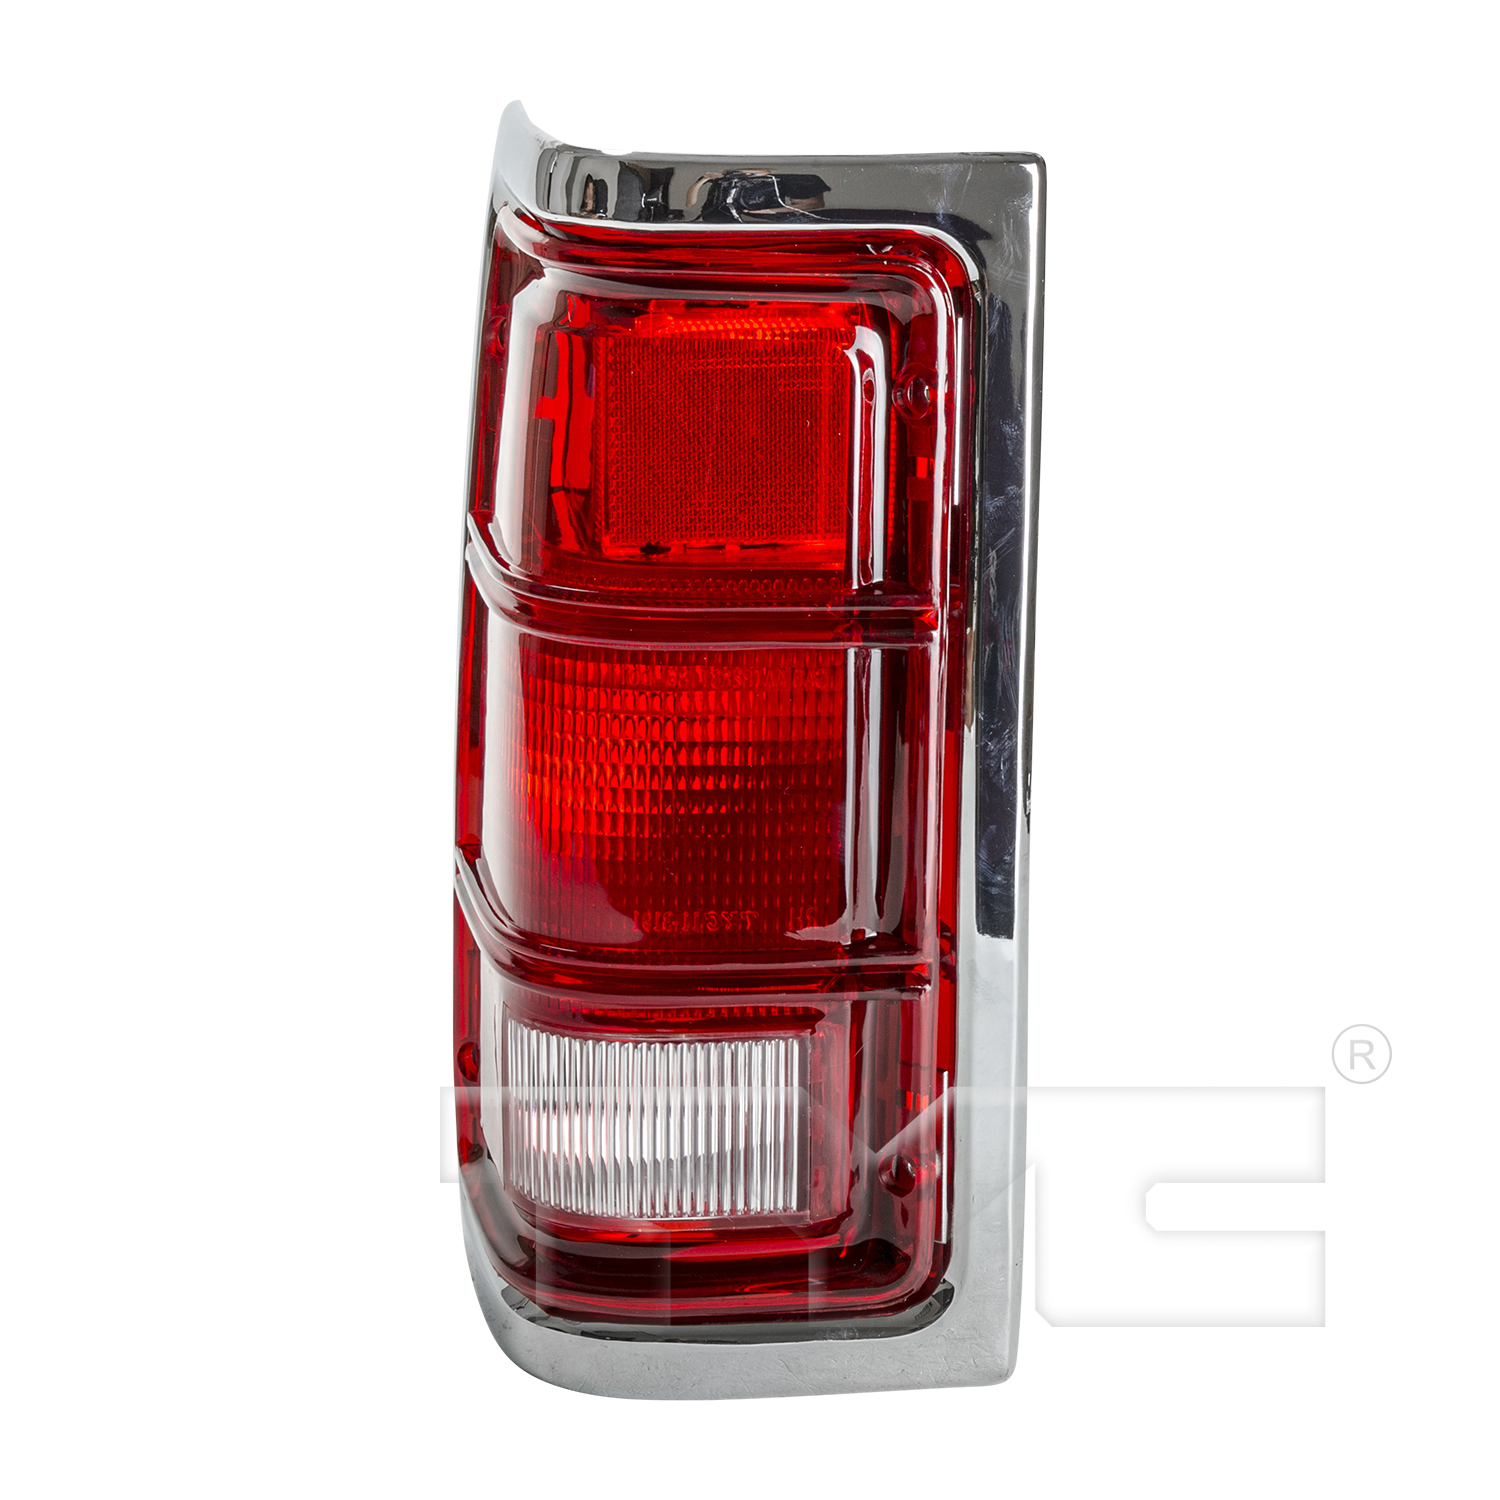 Aftermarket TAILLIGHTS for DODGE - W250, W250,87-91,LT Taillamp lens